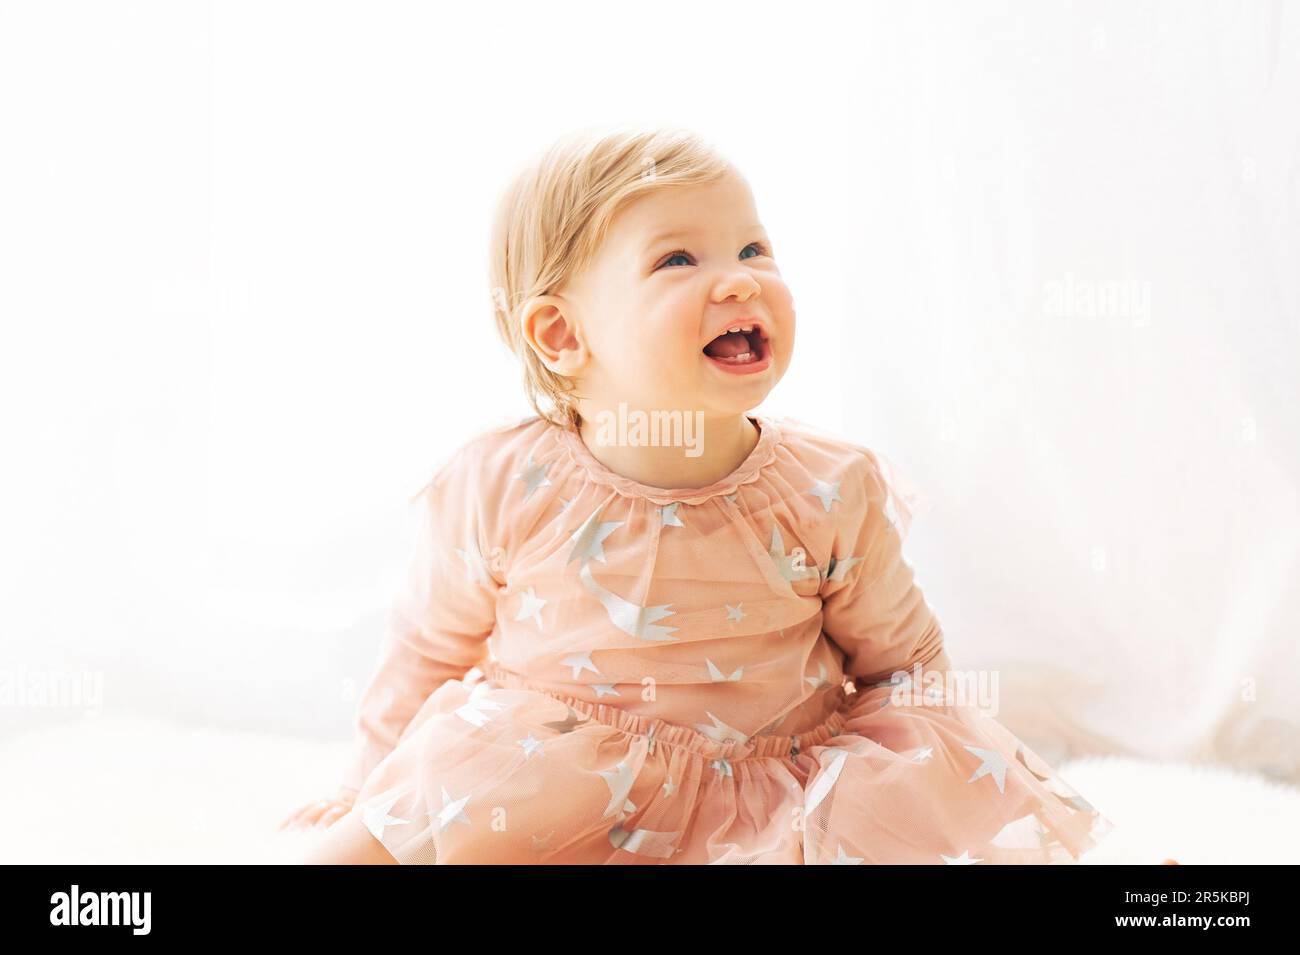 Light soft portrait of cute toddler 1 year old baby girl, wearing pink dress, sitting next to window Stock Photo